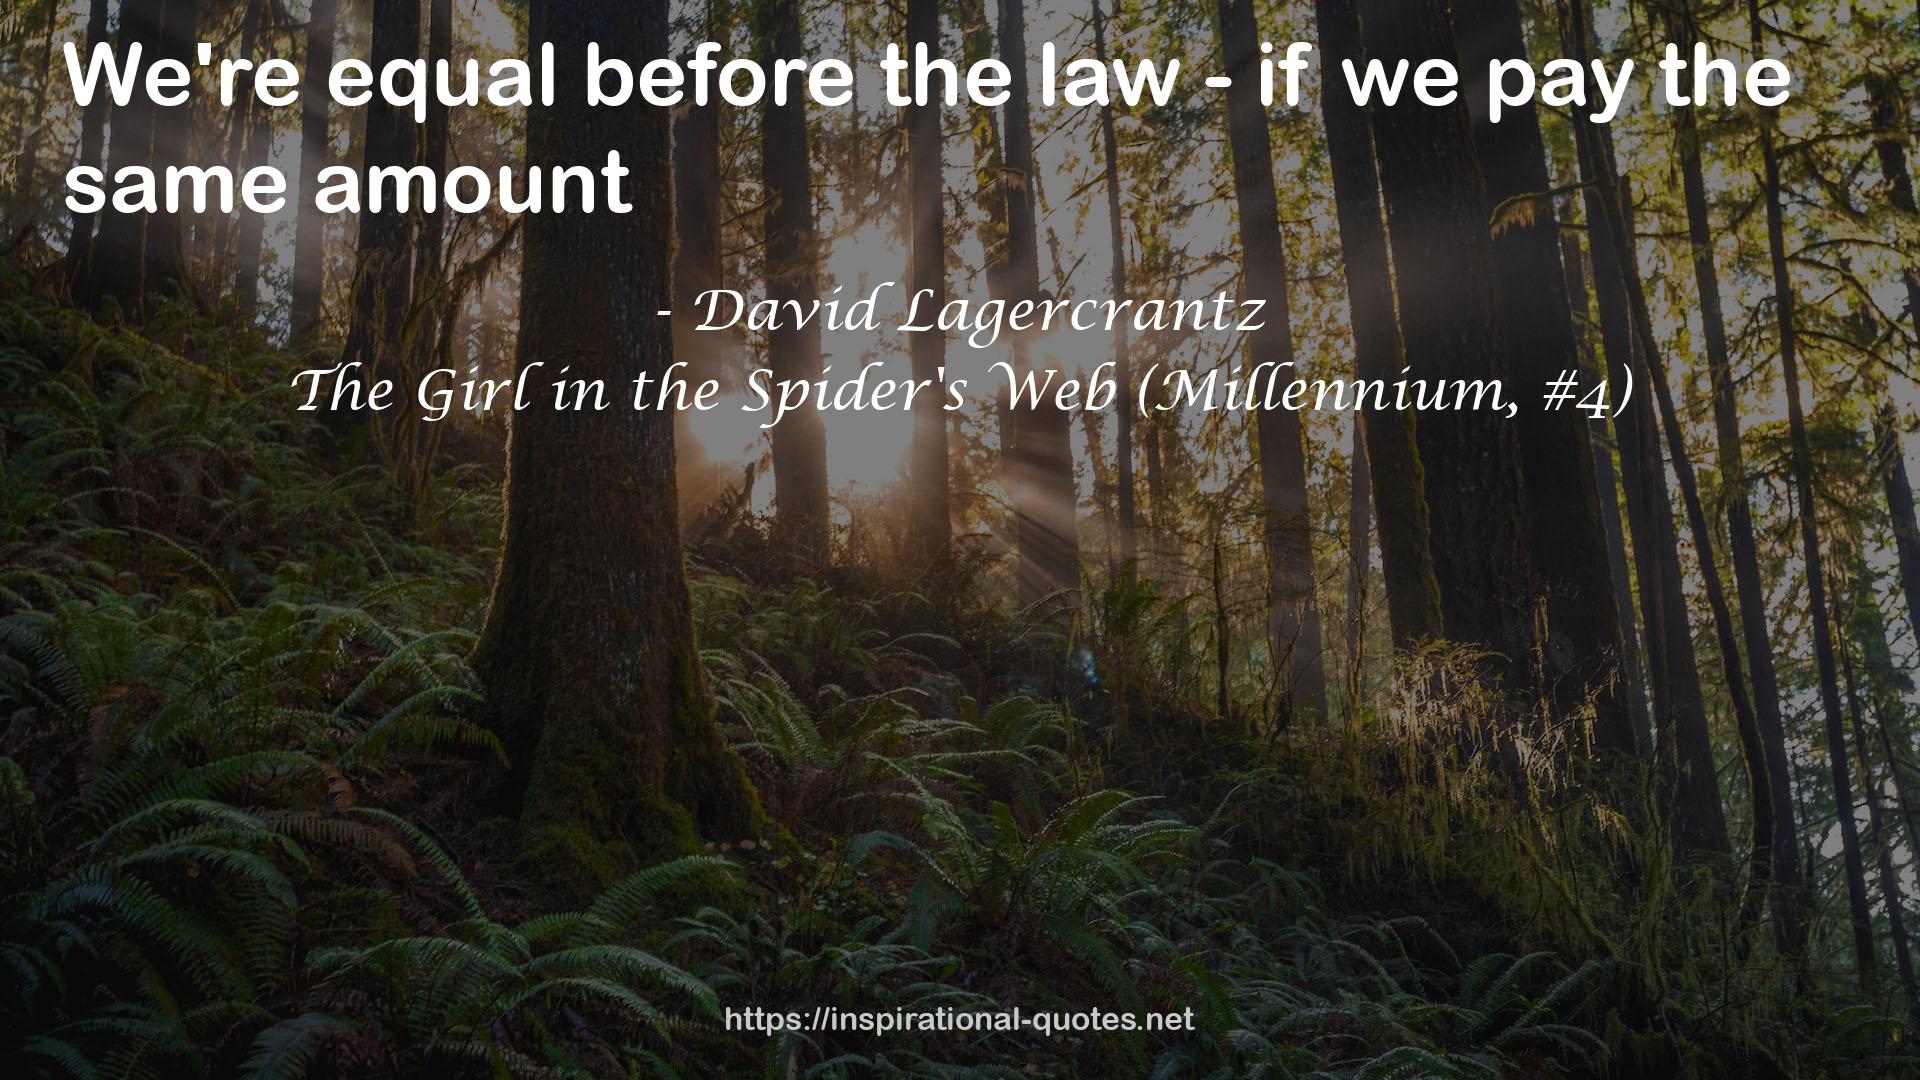 The Girl in the Spider's Web (Millennium, #4) QUOTES